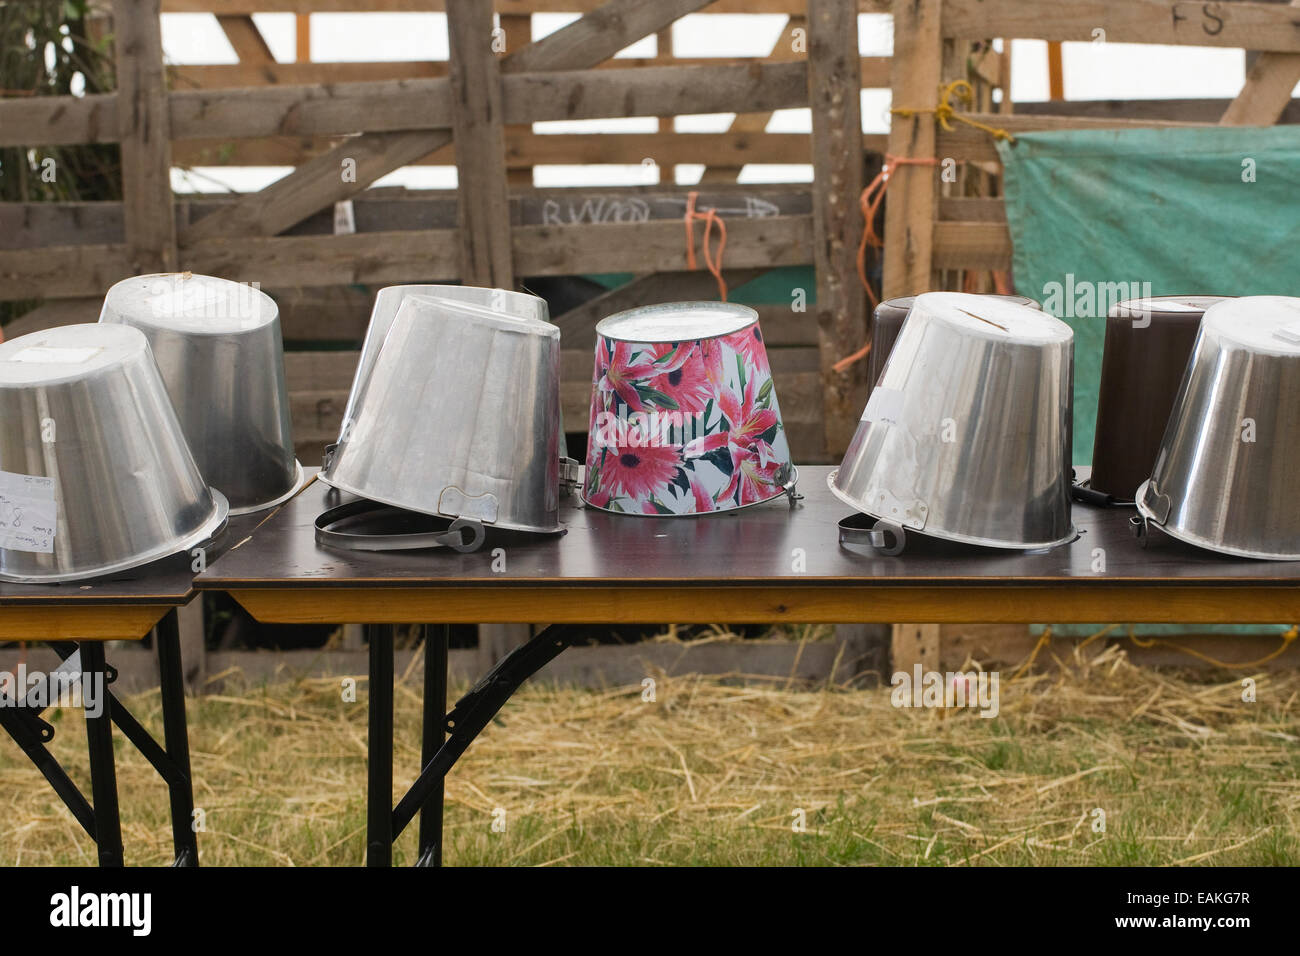 Buckets lined up on a table for goat milking at an agricultural show, UK. Stock Photo